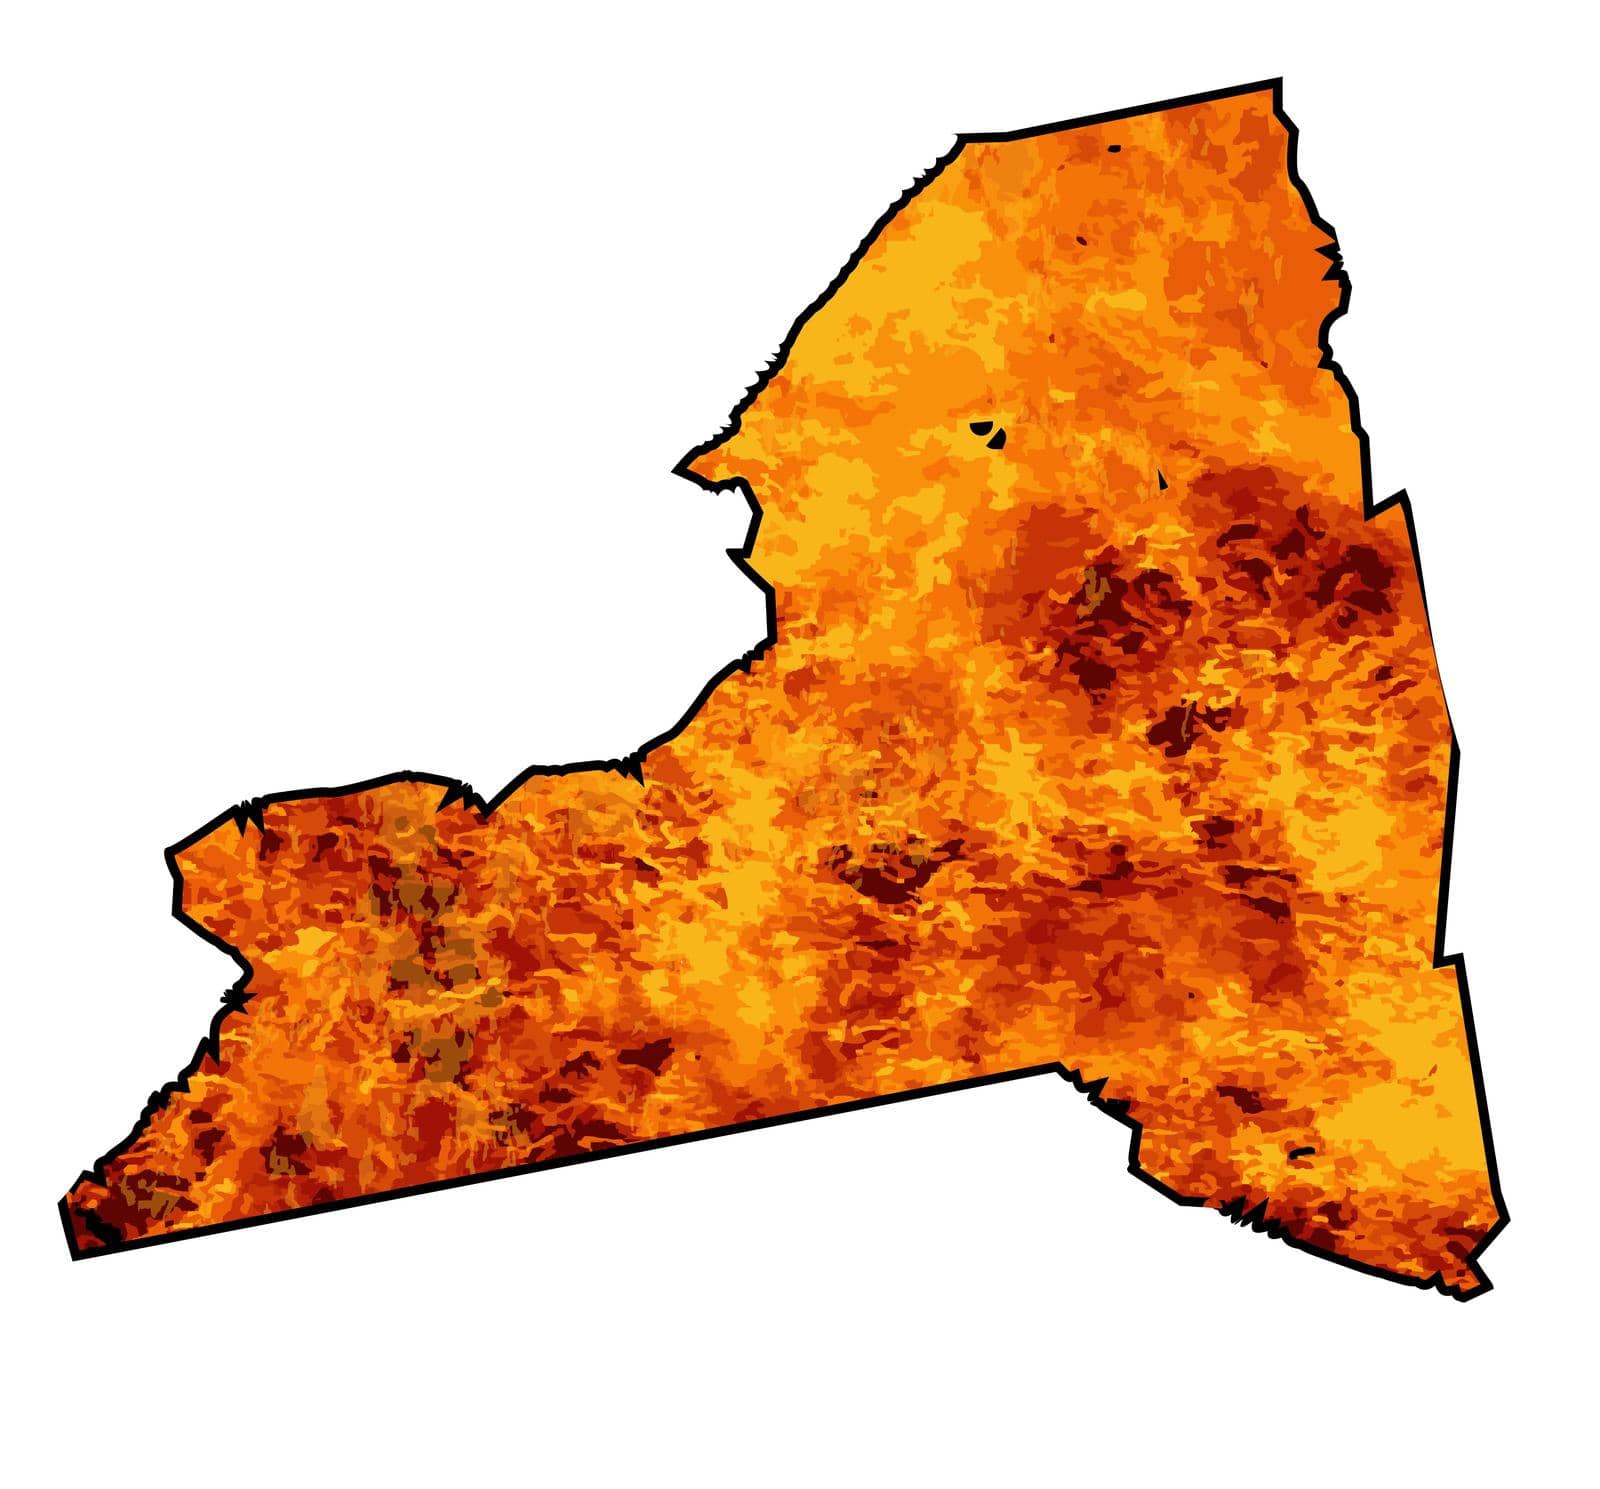 Silhouette map of New York State over a white background with flames inset into the silhouette